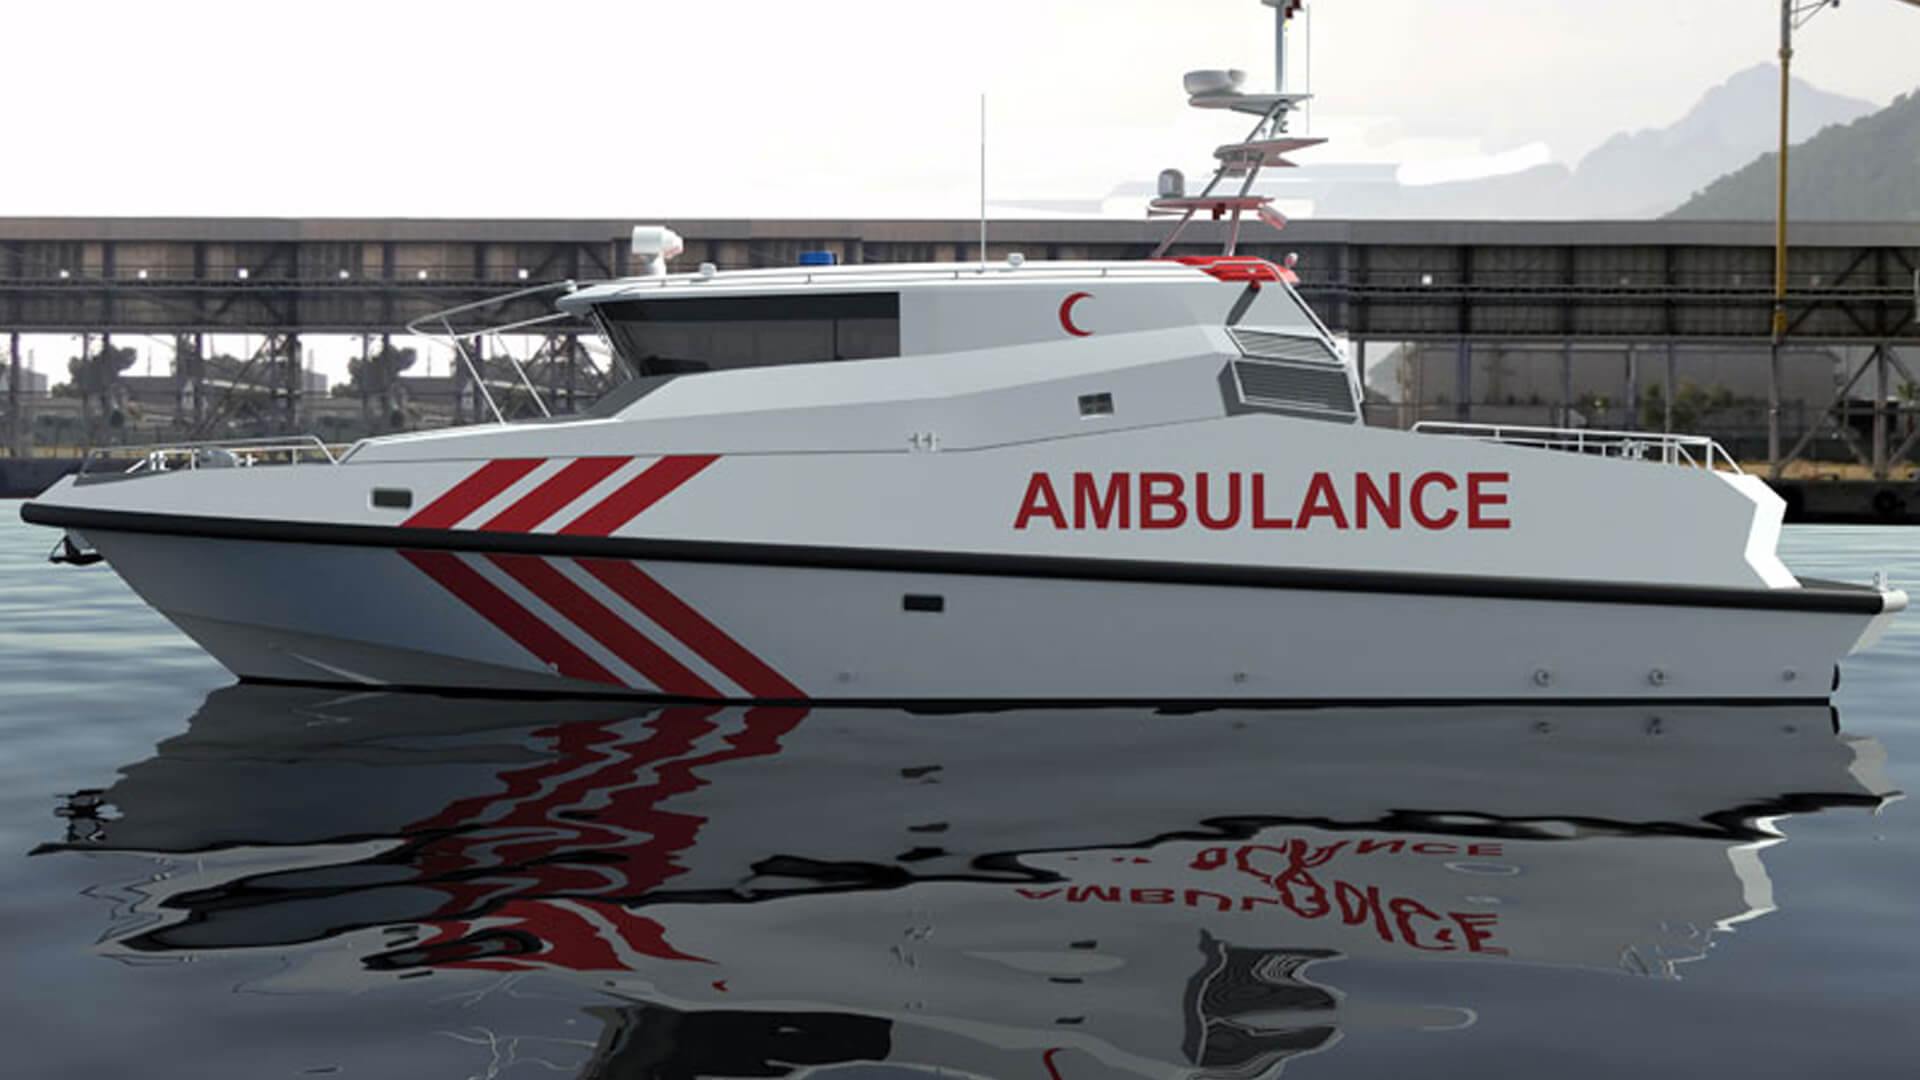 images/vessels/03-utility-support-craft/01-sar-ambulance-boats/02-ares-58-ambulance/01.jpg